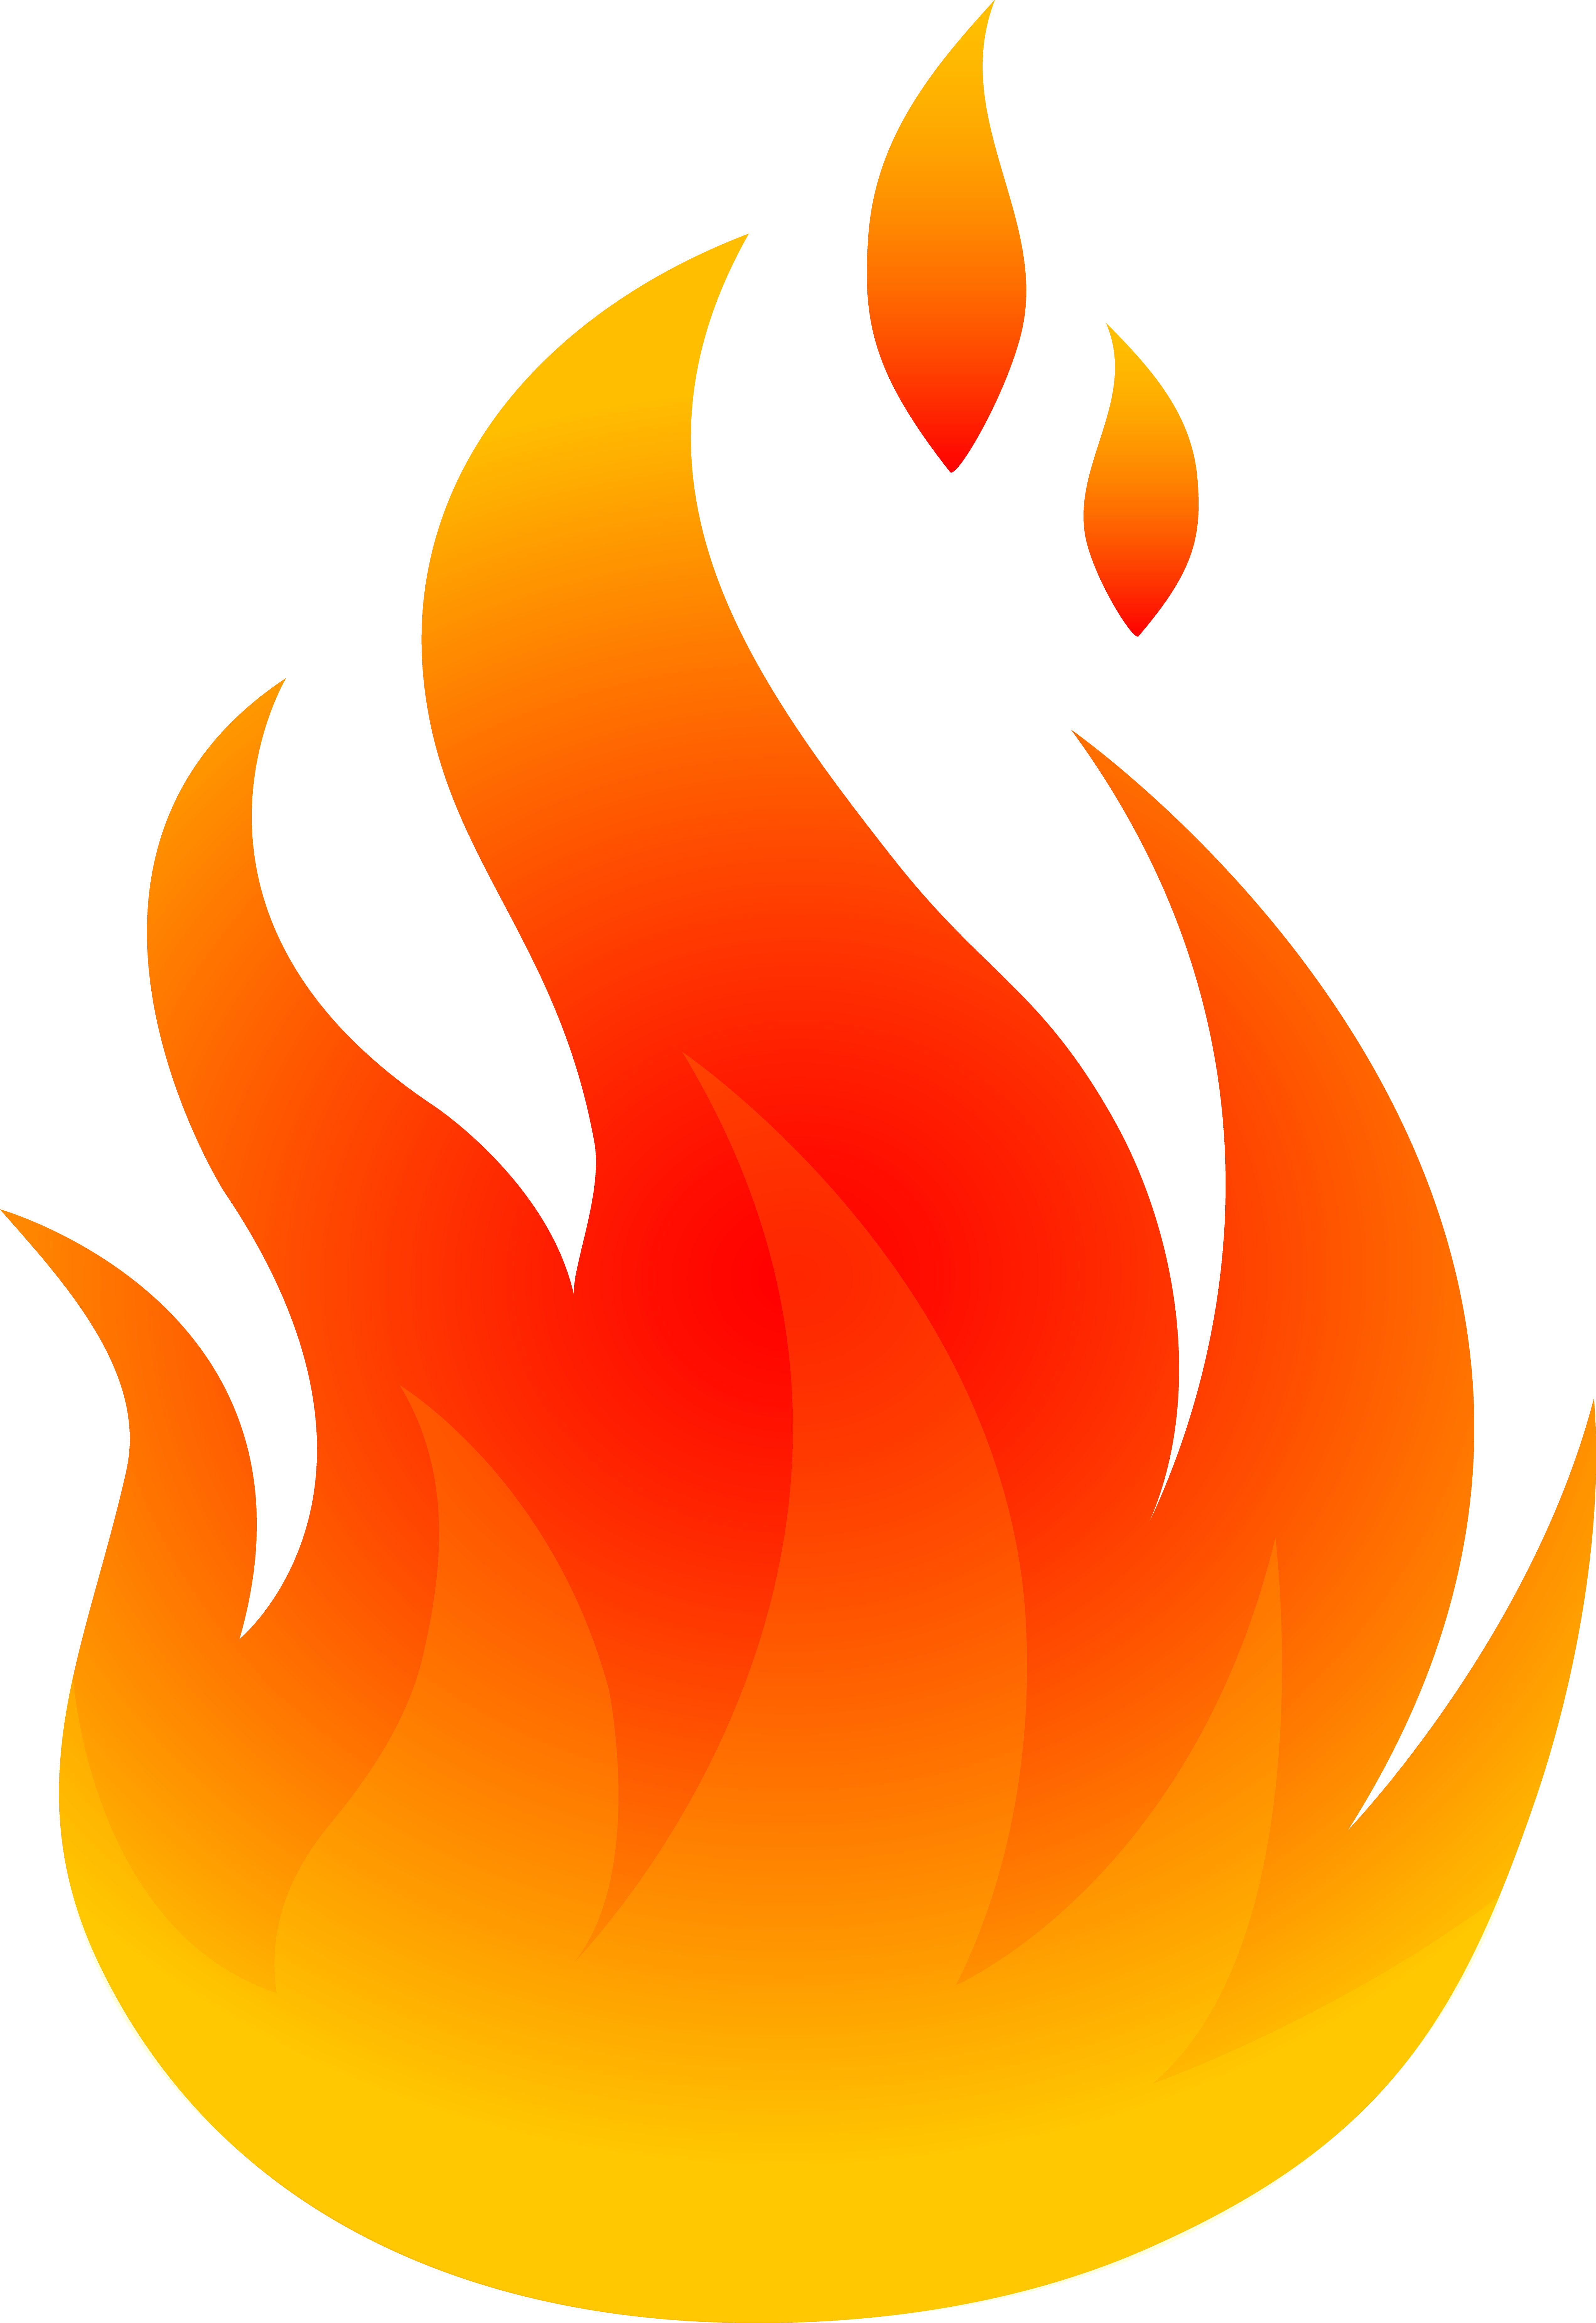 FLAME VECTOR DRAWING - ClipArt Best